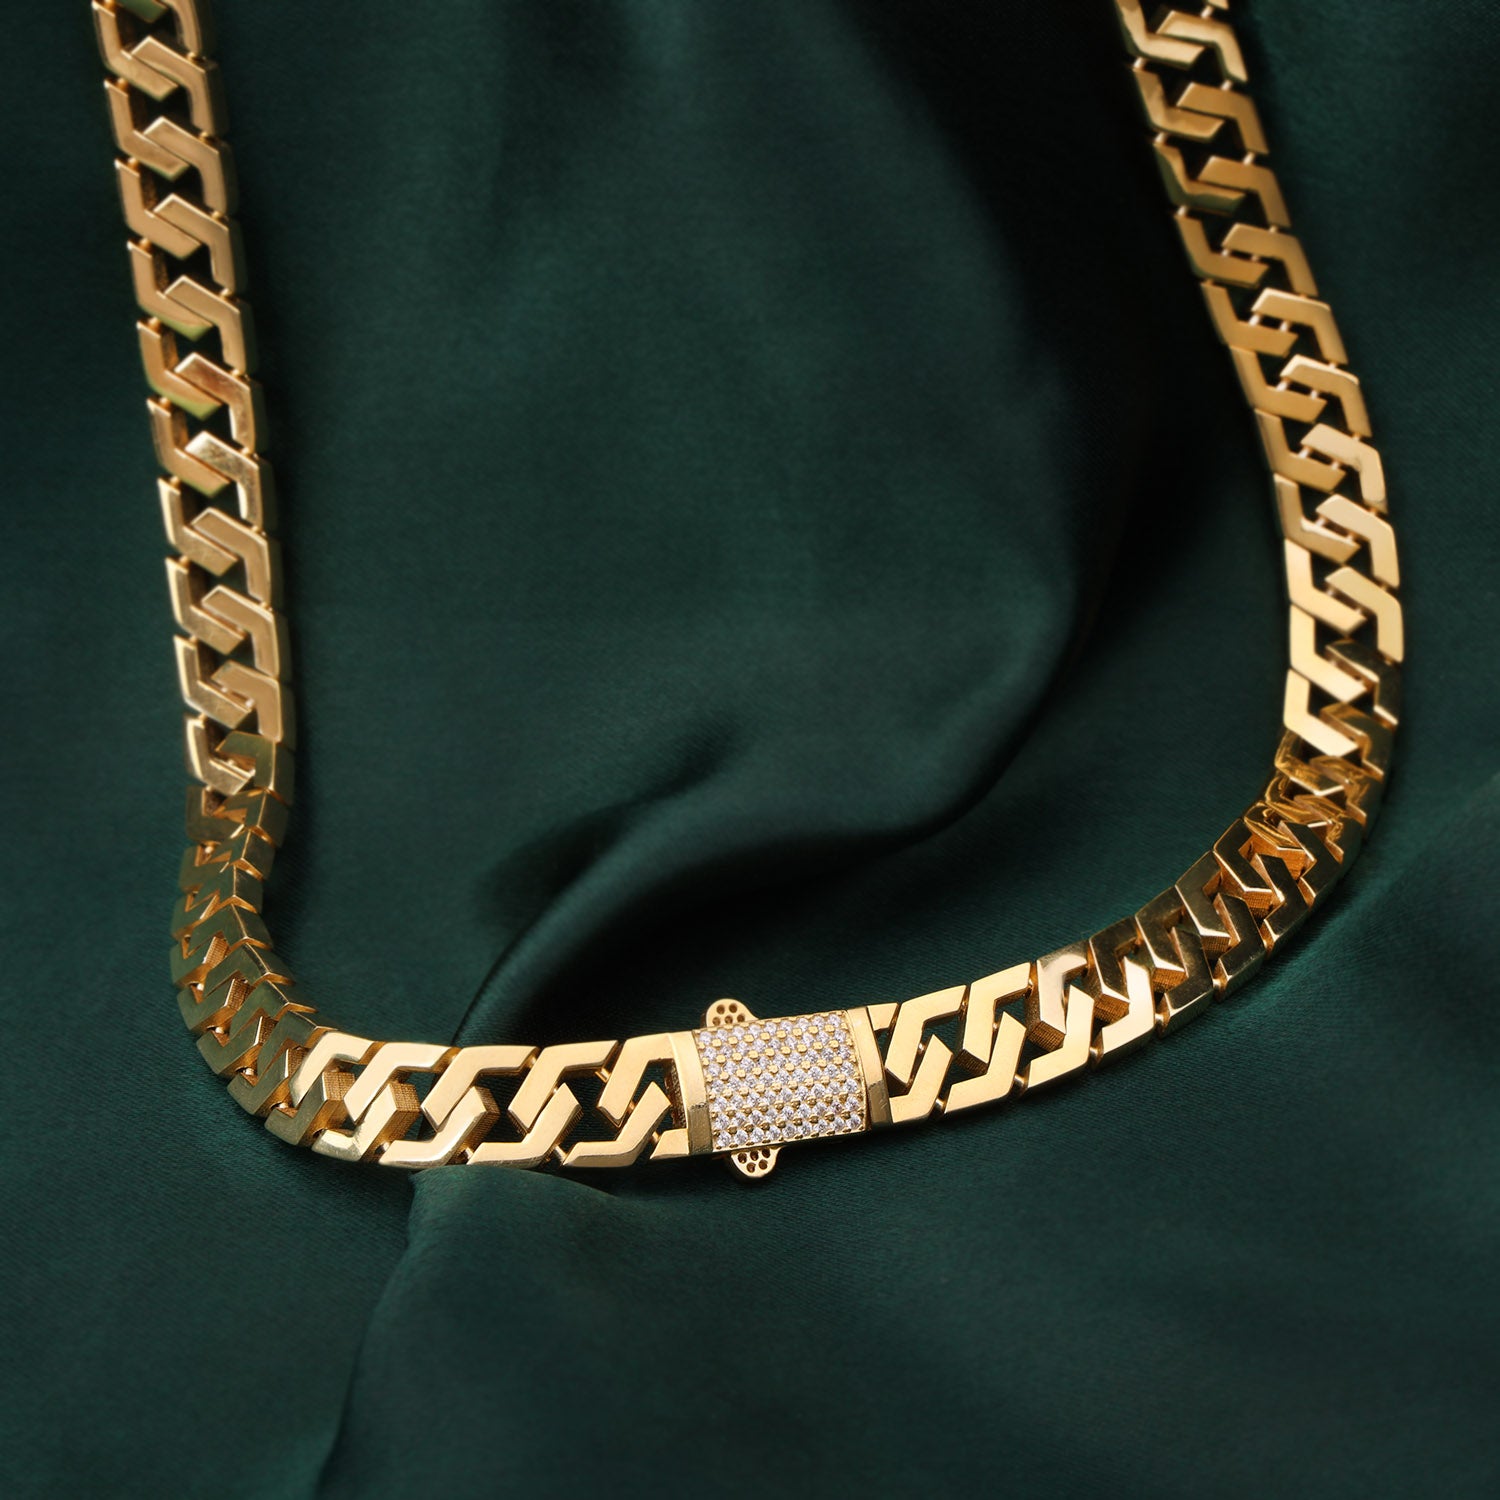 "Dynamic Duo: Silver and Gold Men's Chain & Bracelet"